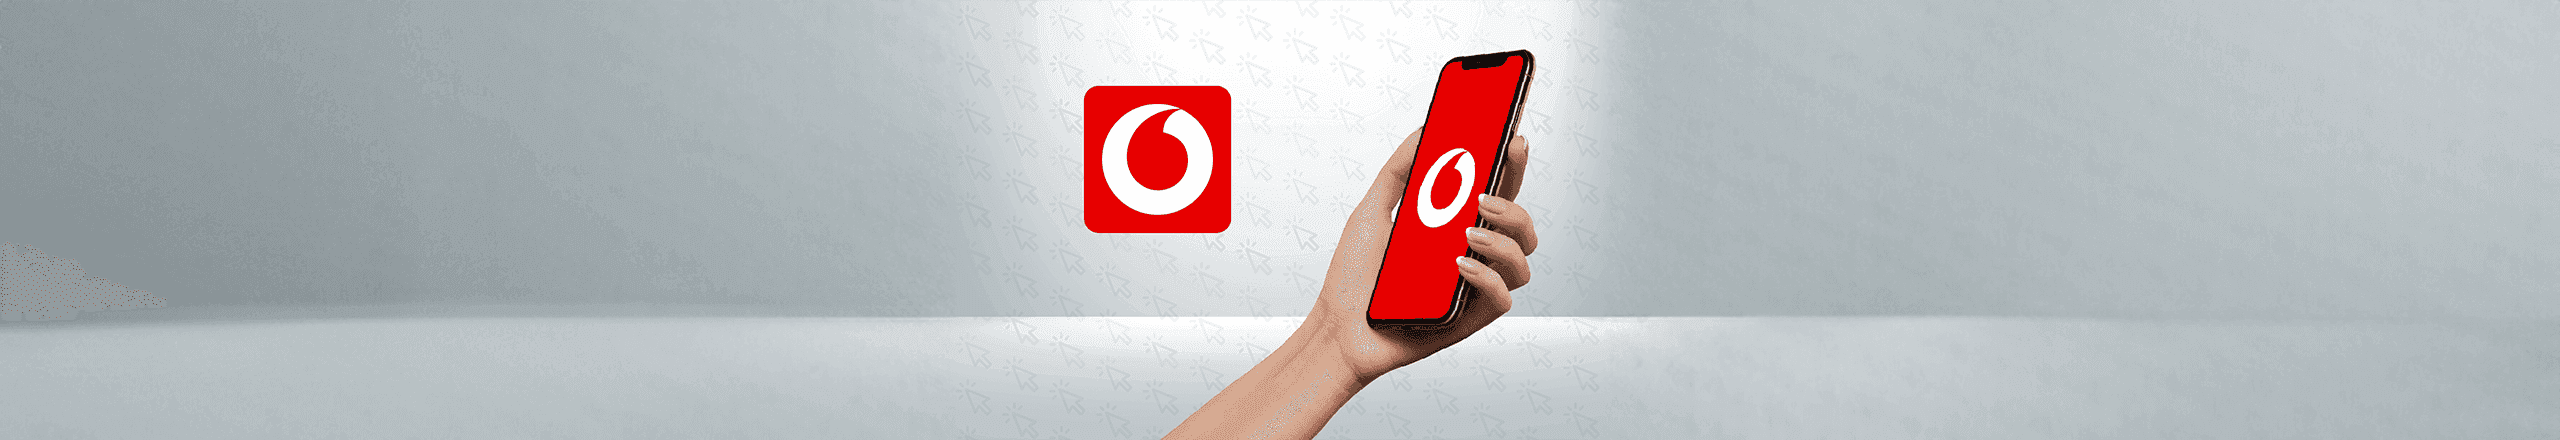 My_Vodafone_354484759_2560x440.png